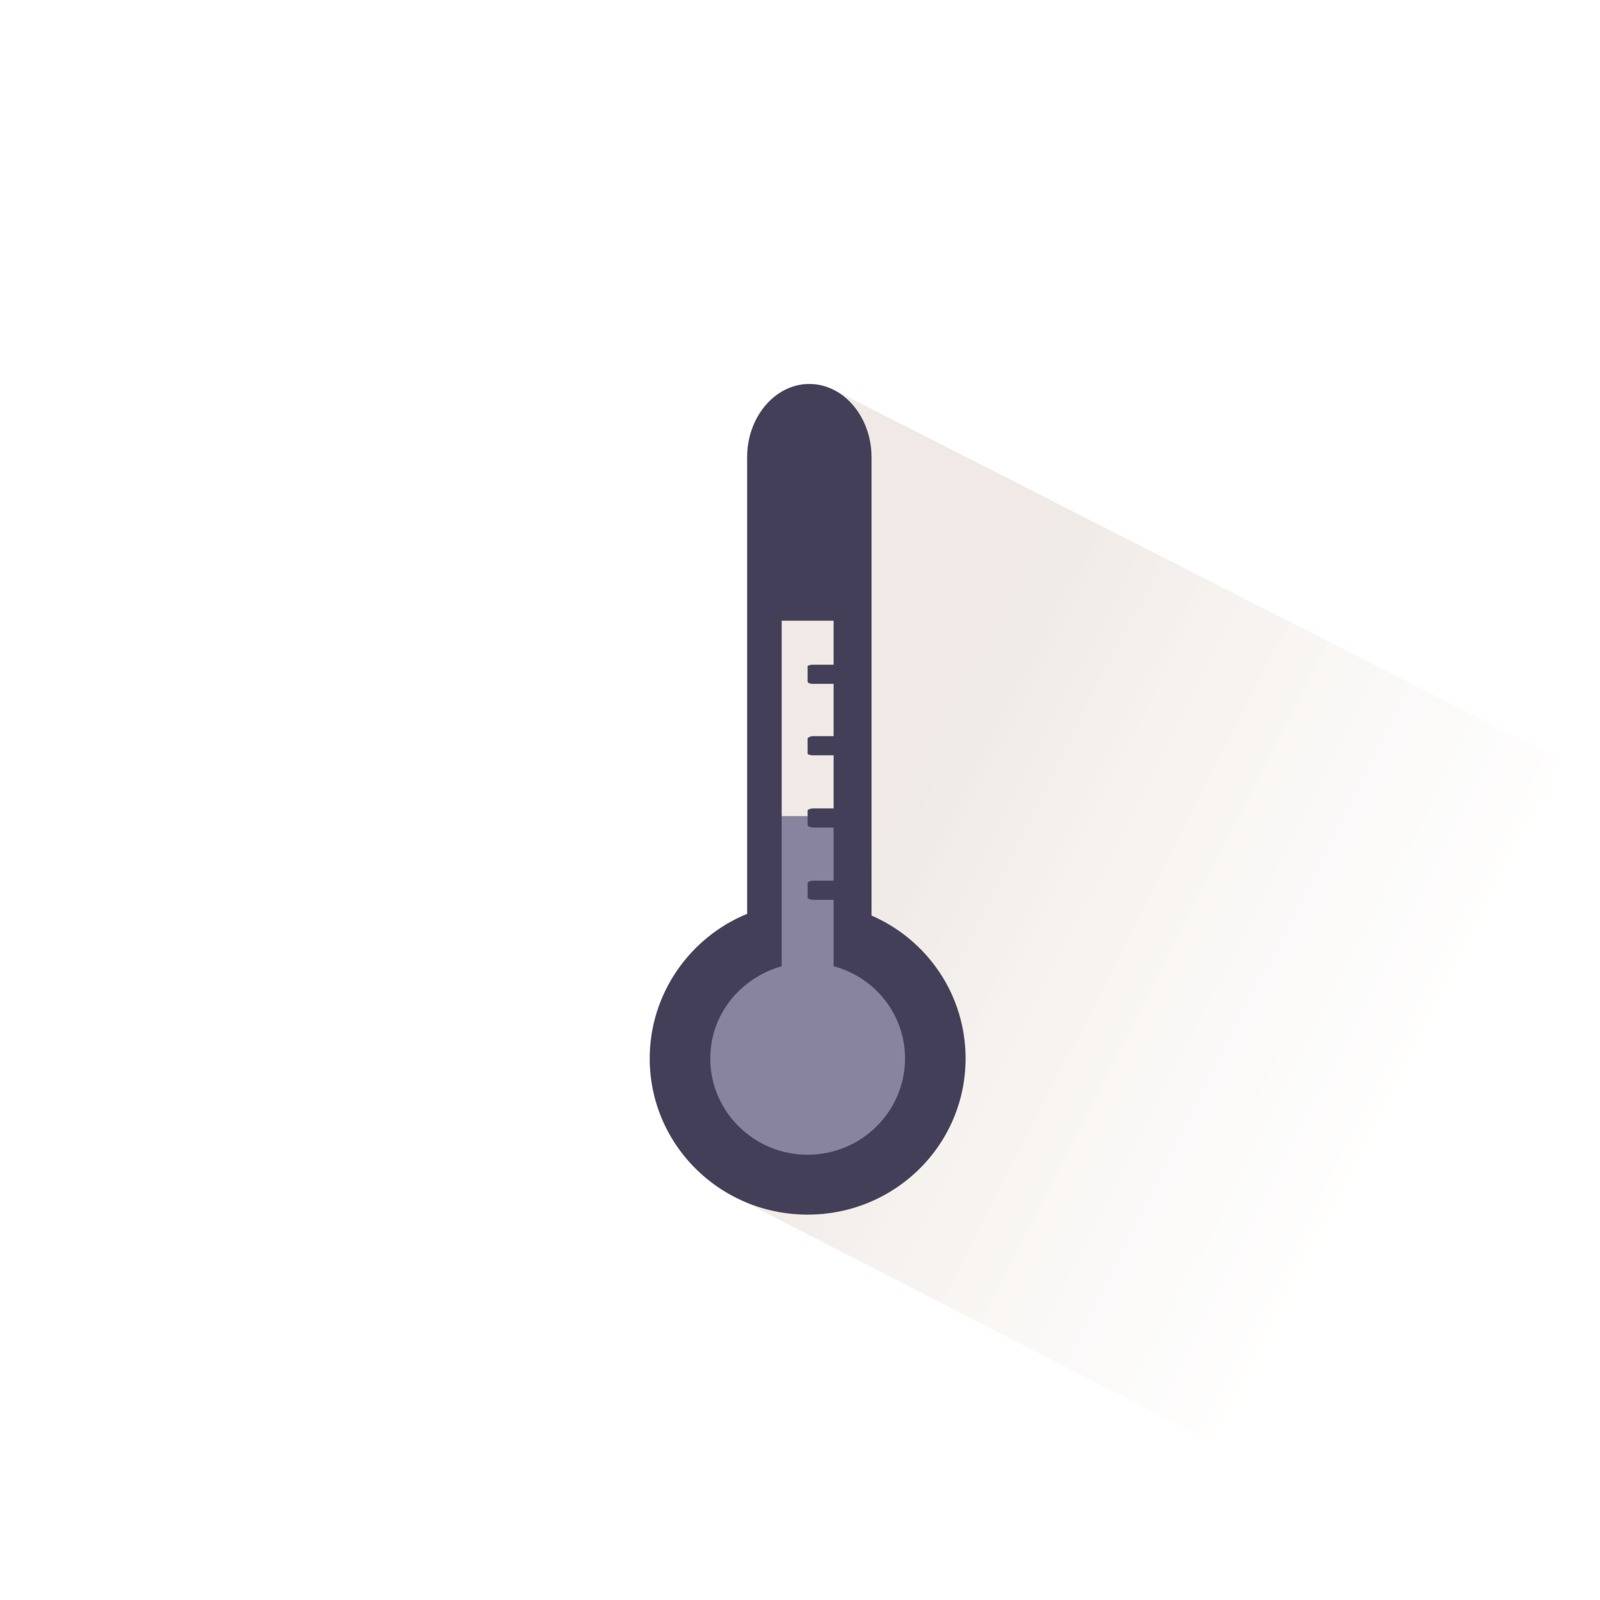 Weather thermometer icon with shadow. Flat vector illustration by Imaagio